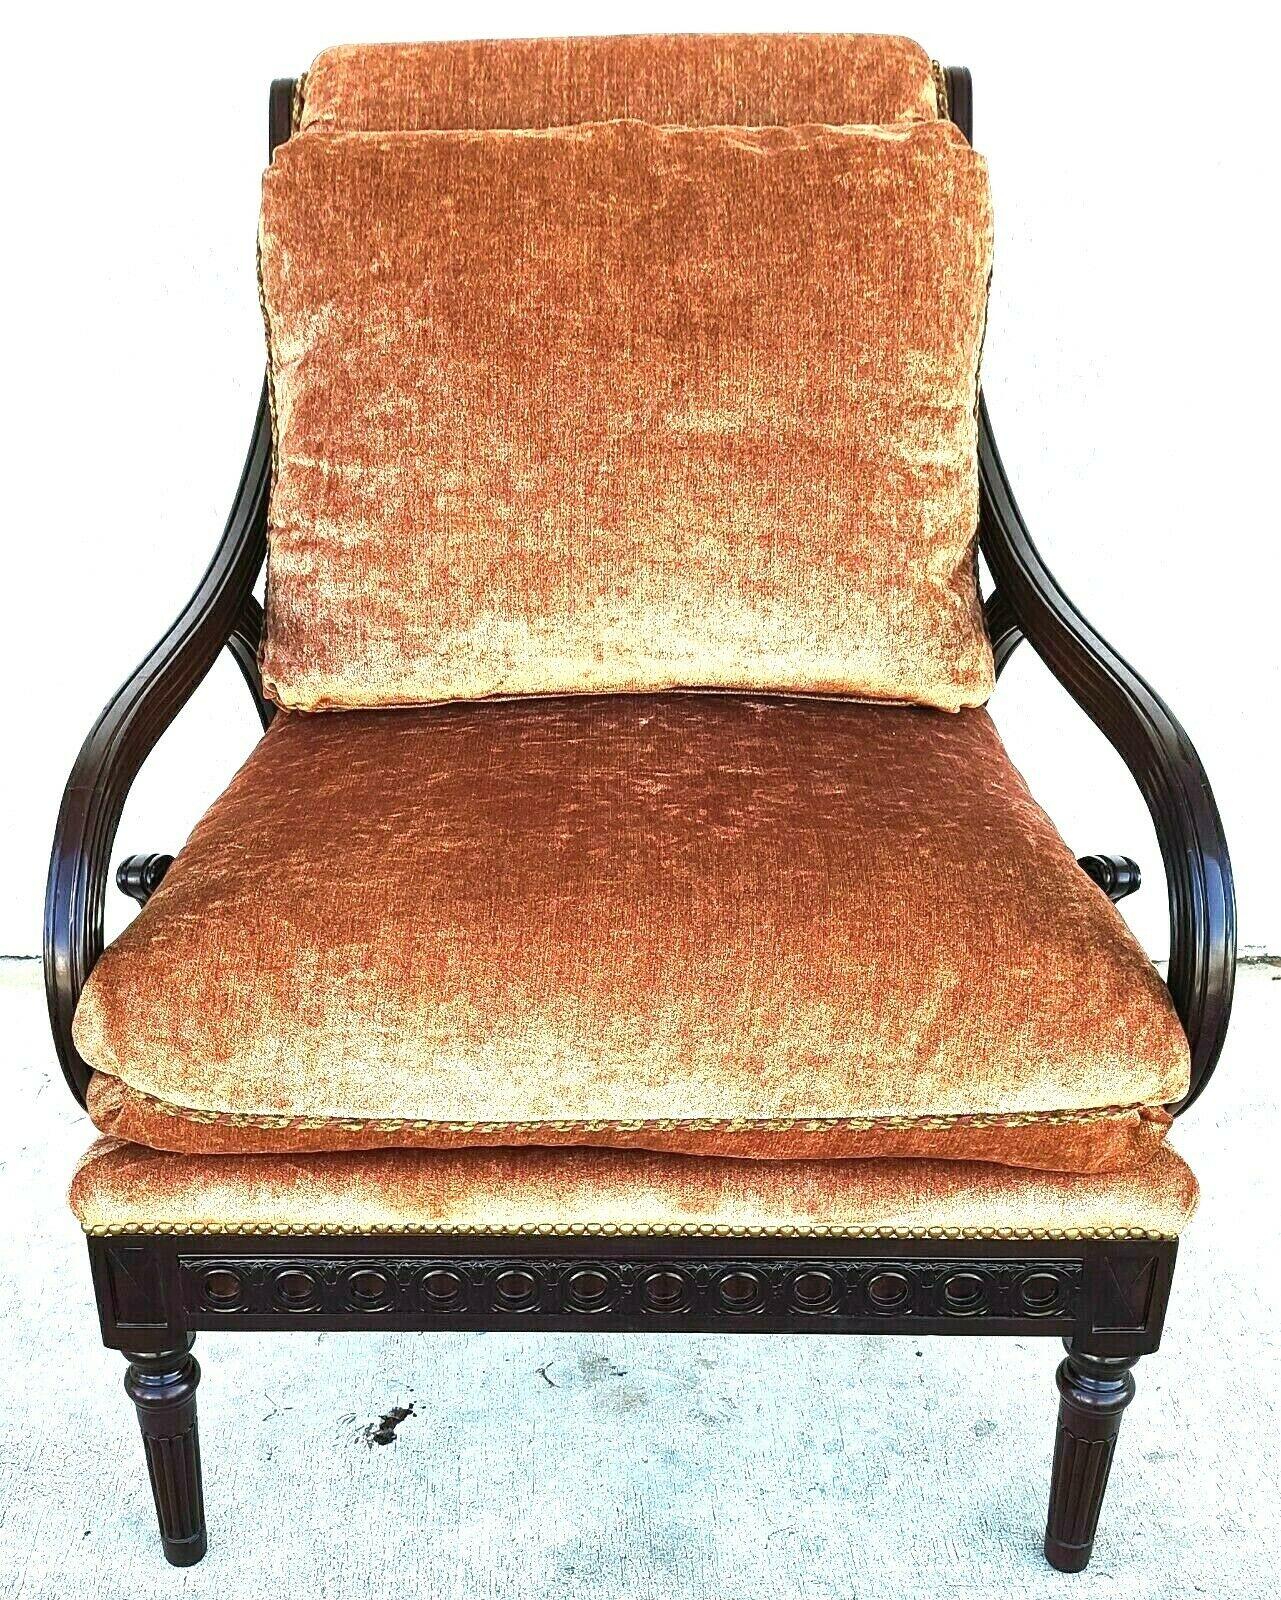 For FULL item description be sure to click on CONTINUE READING at the bottom of this listing.
Offering One Of Our Recent Palm Beach Estate Fine Furniture Acquisitions Of A Regency Style Scroll Mahogany Armchair by CLASSICS Furniture of North